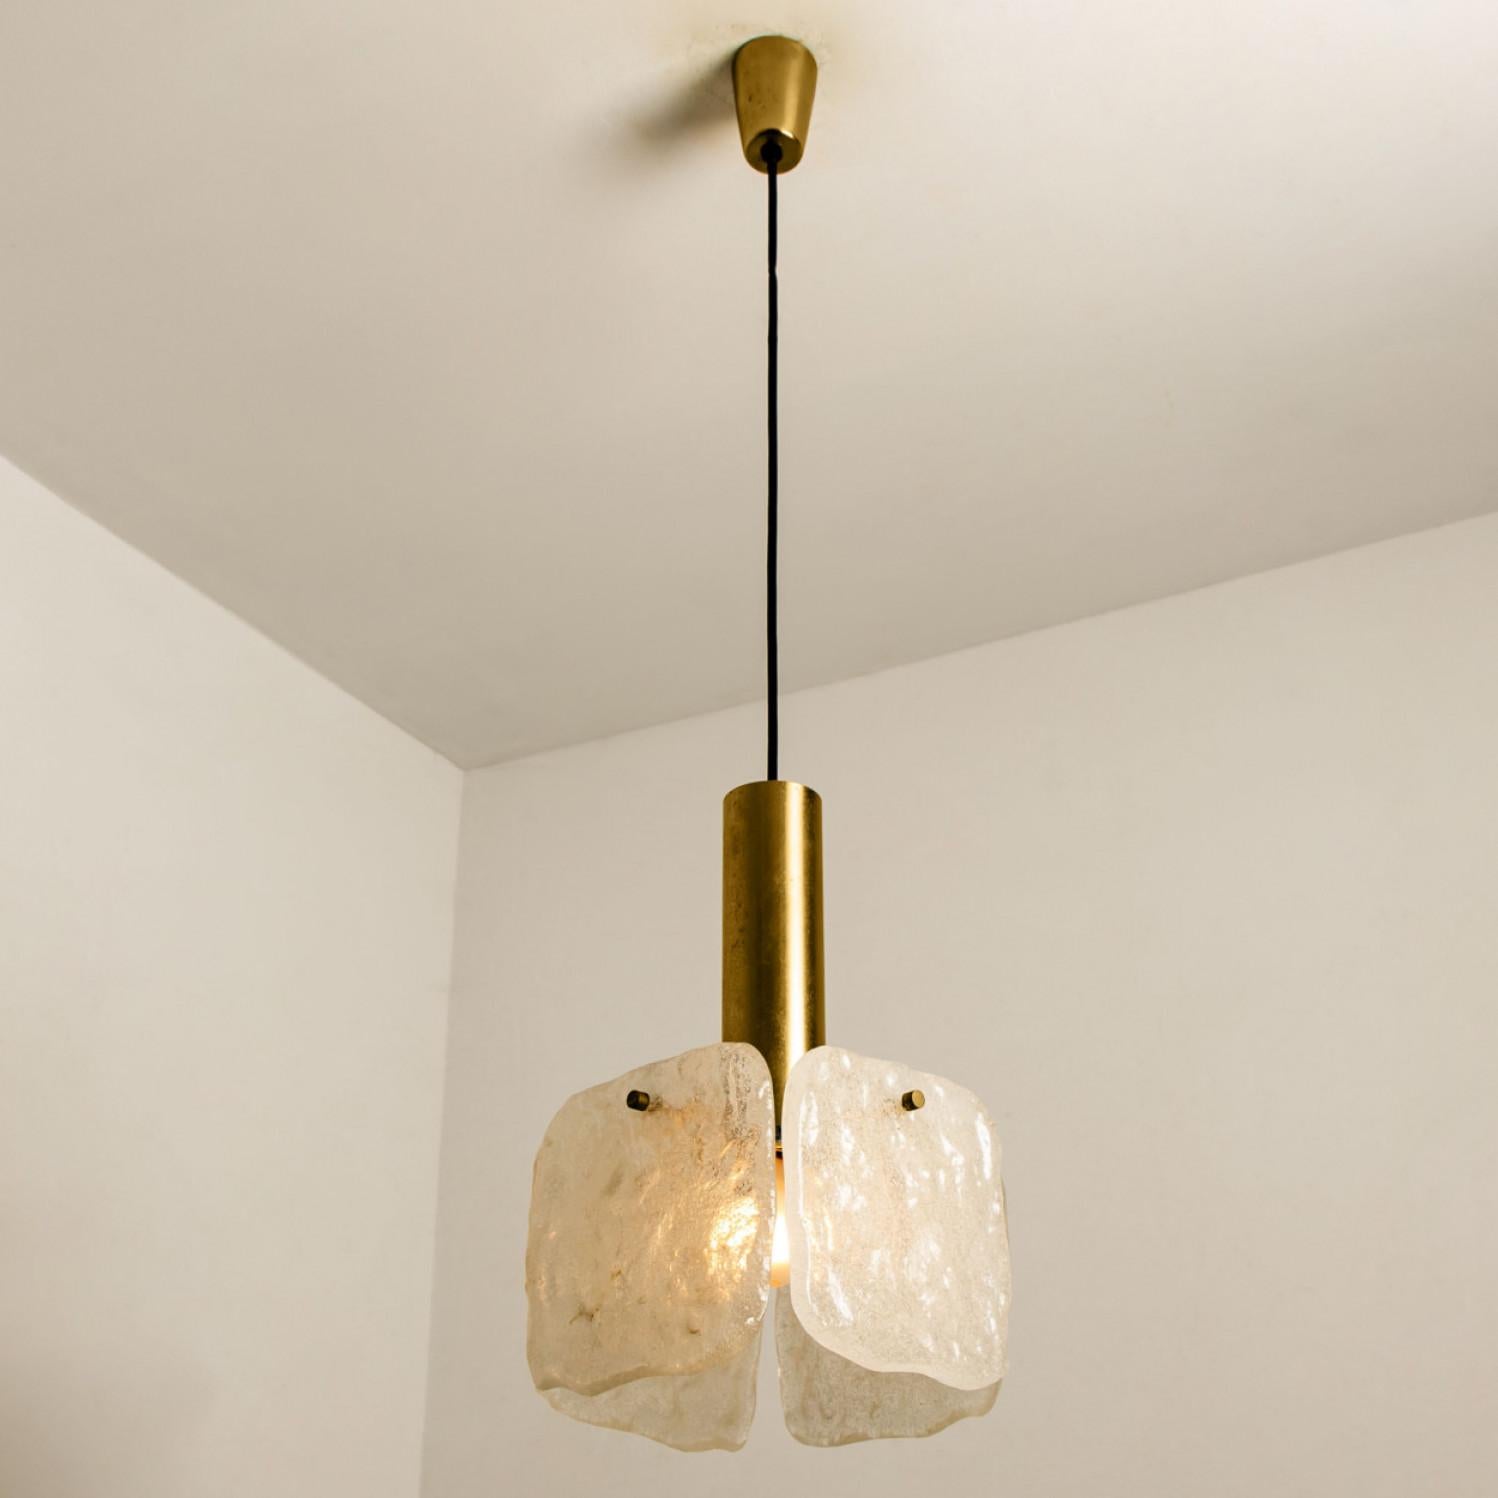 One of Three Ice Glass Pendant Lights from J.T. Kalmar, 1960s For Sale 7